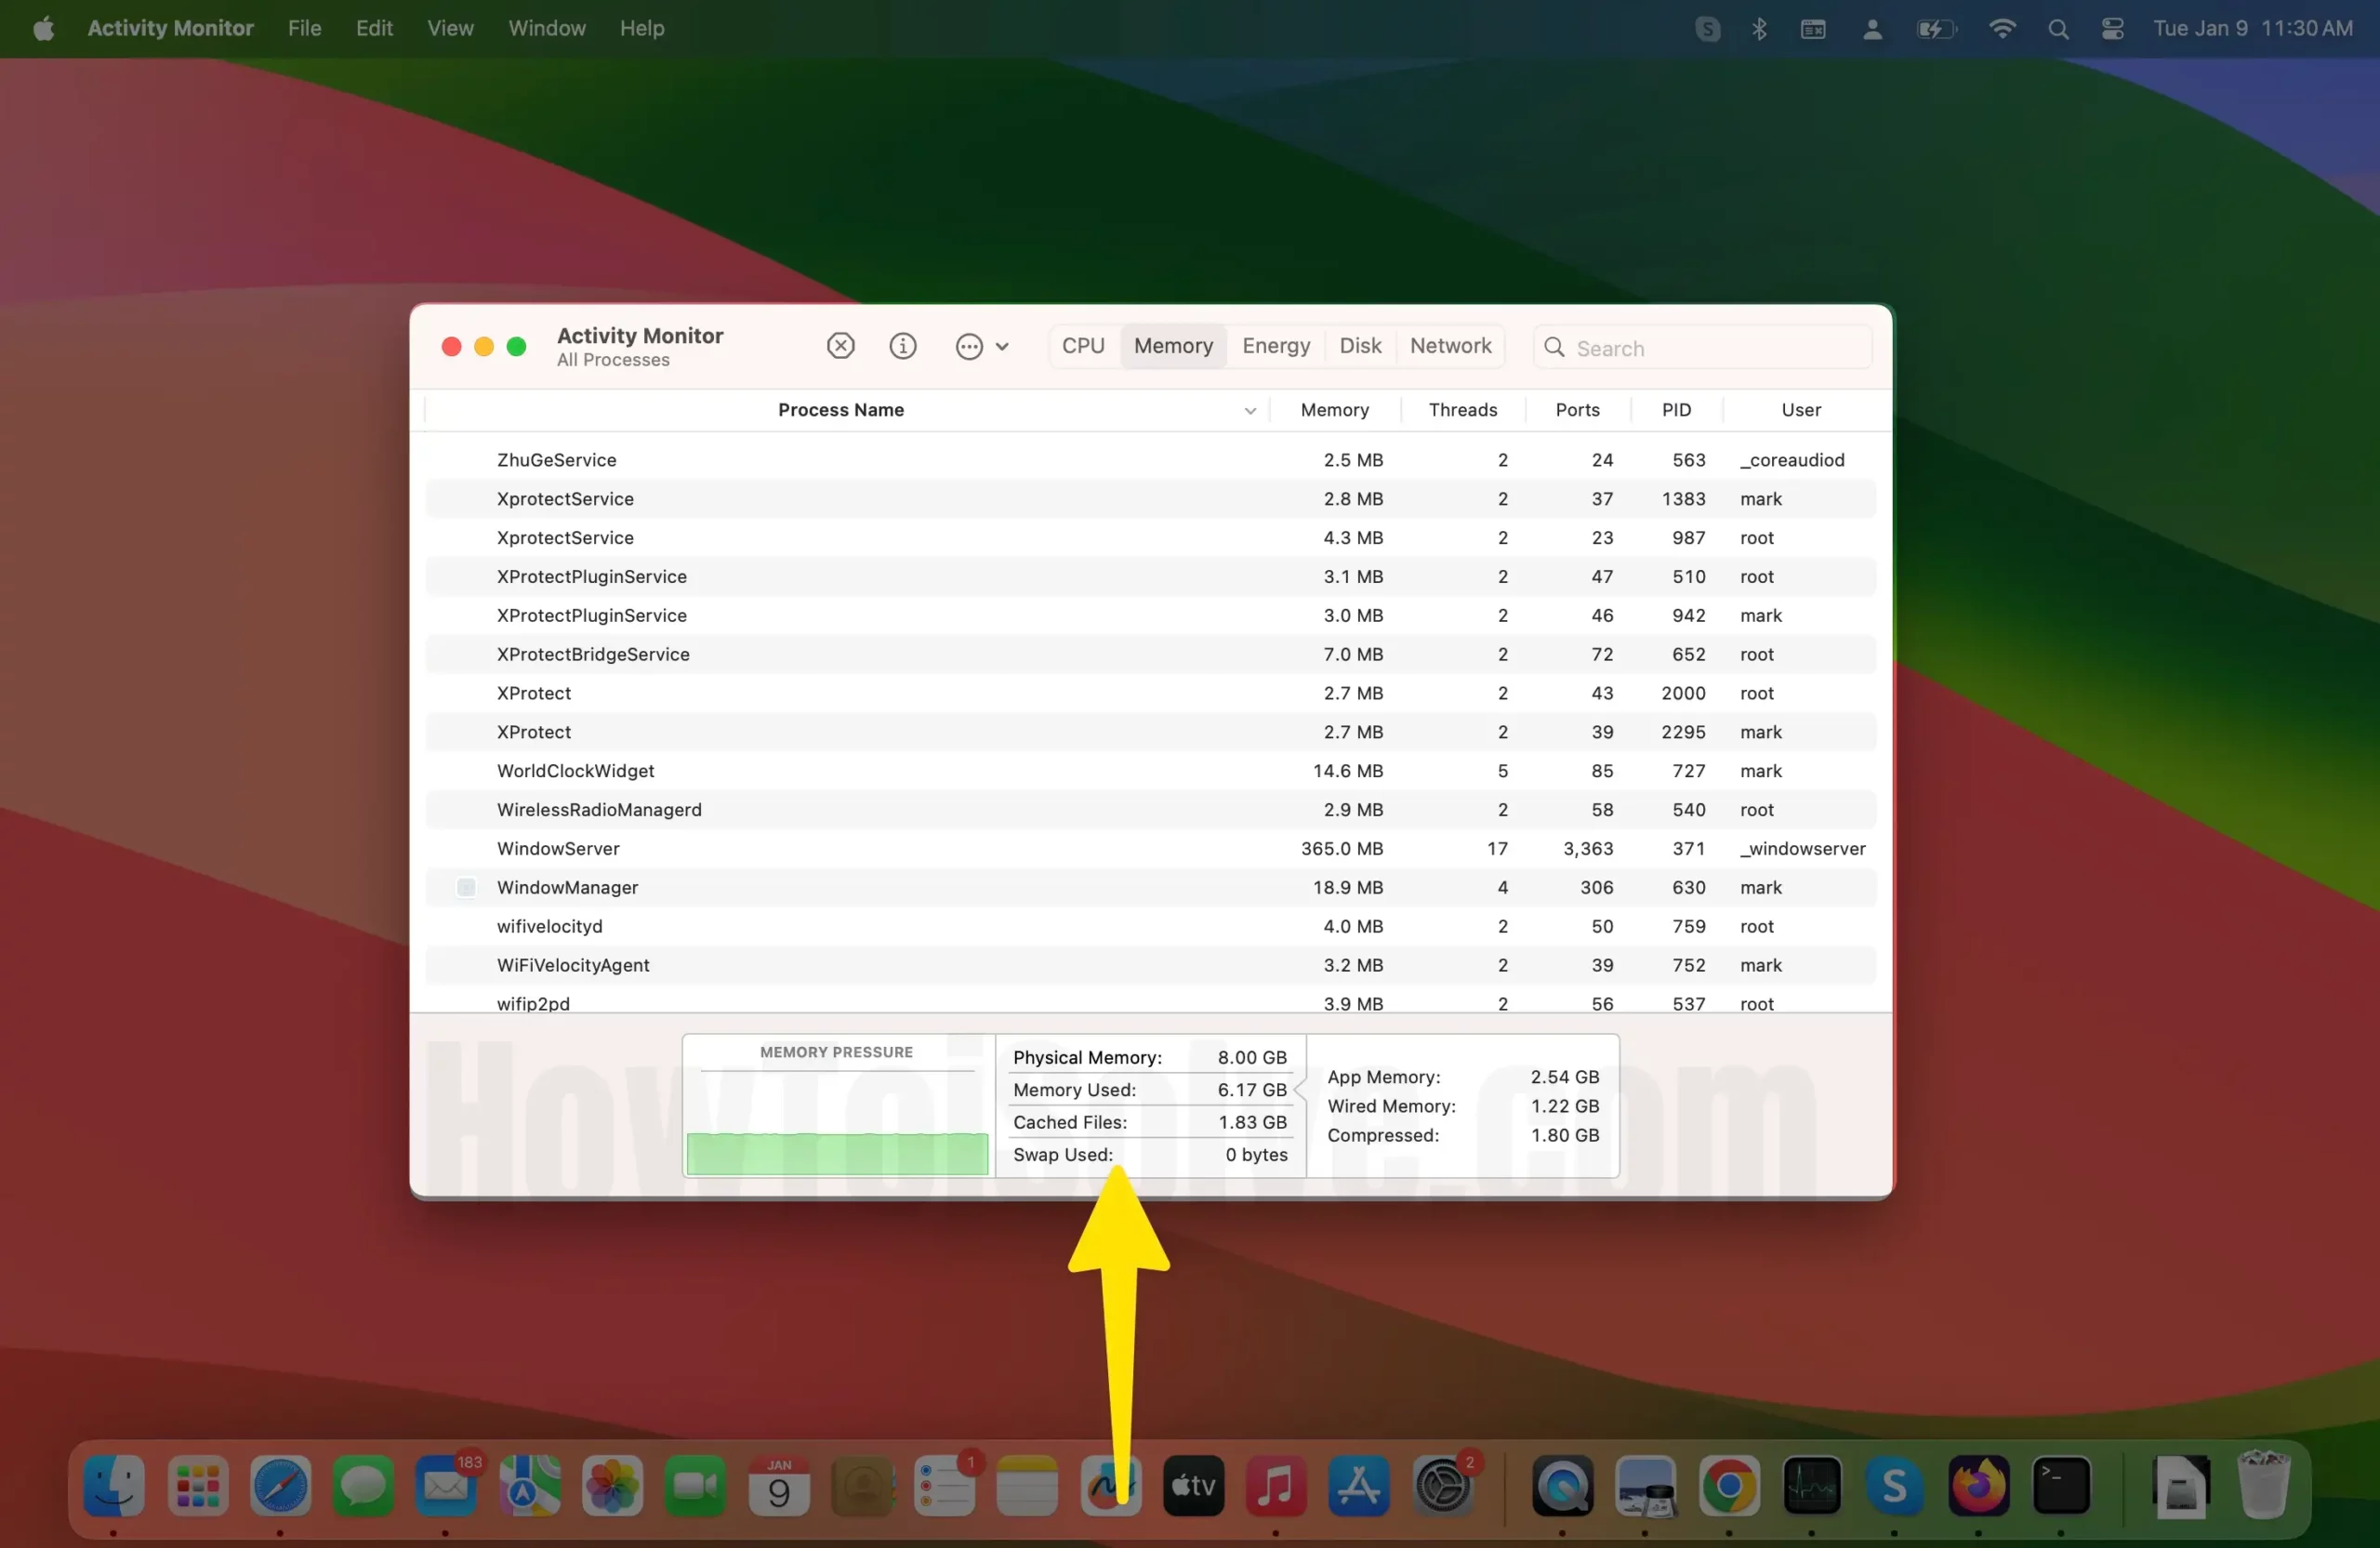 You can cross-verify total physical memory and memory used on the Mac on mac